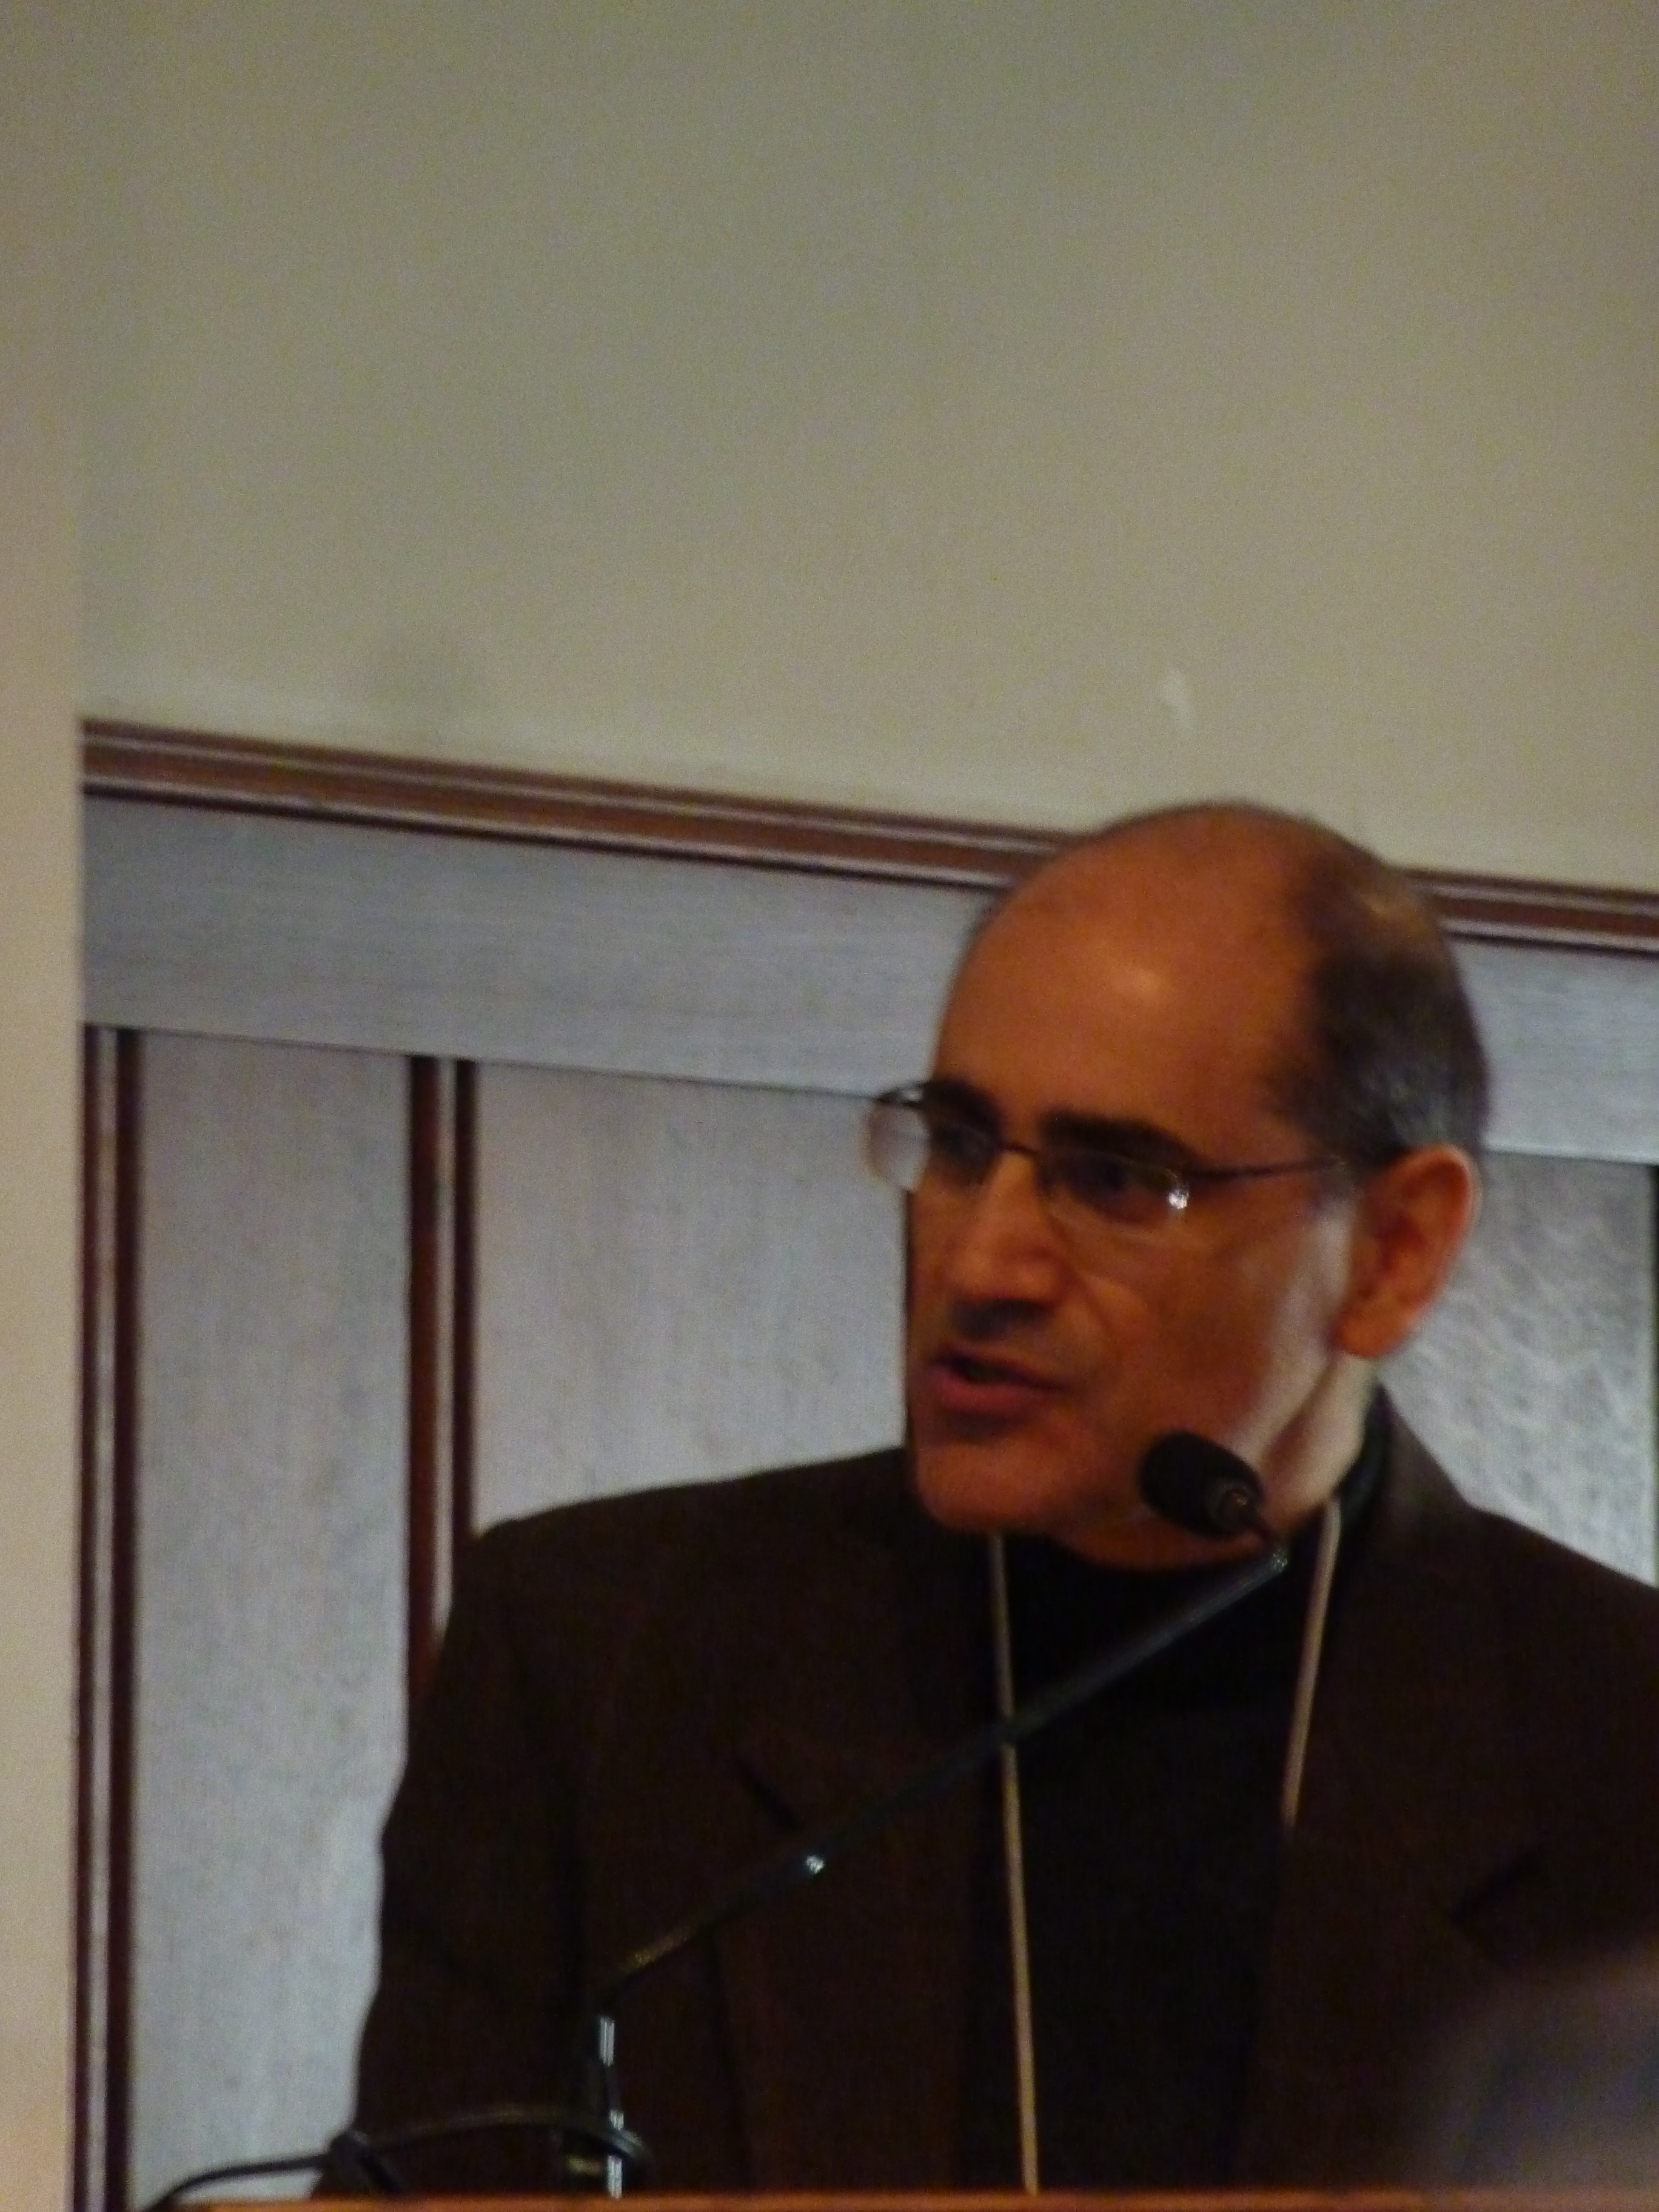 Mohammad al-Asad, founding director of the Center for the Study of the Built Environment in Amman, Jordan